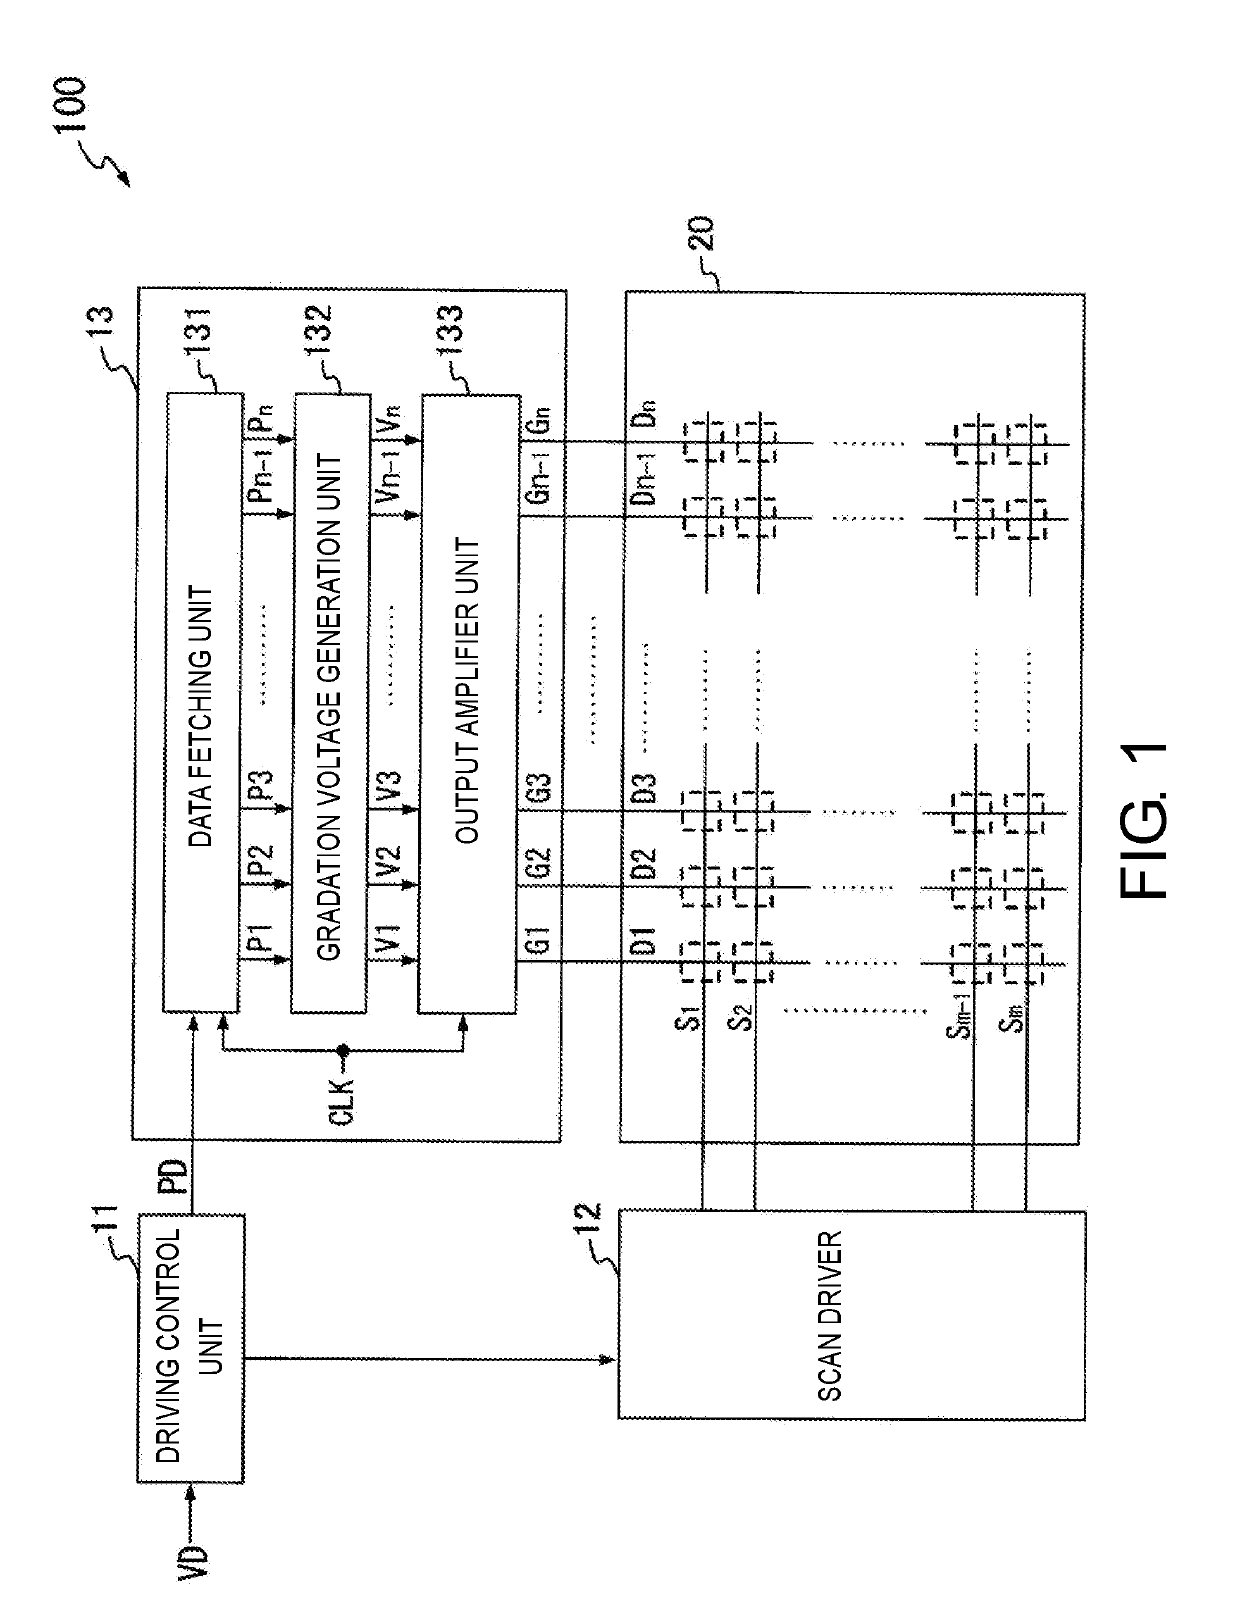 Display driver and semiconductor device